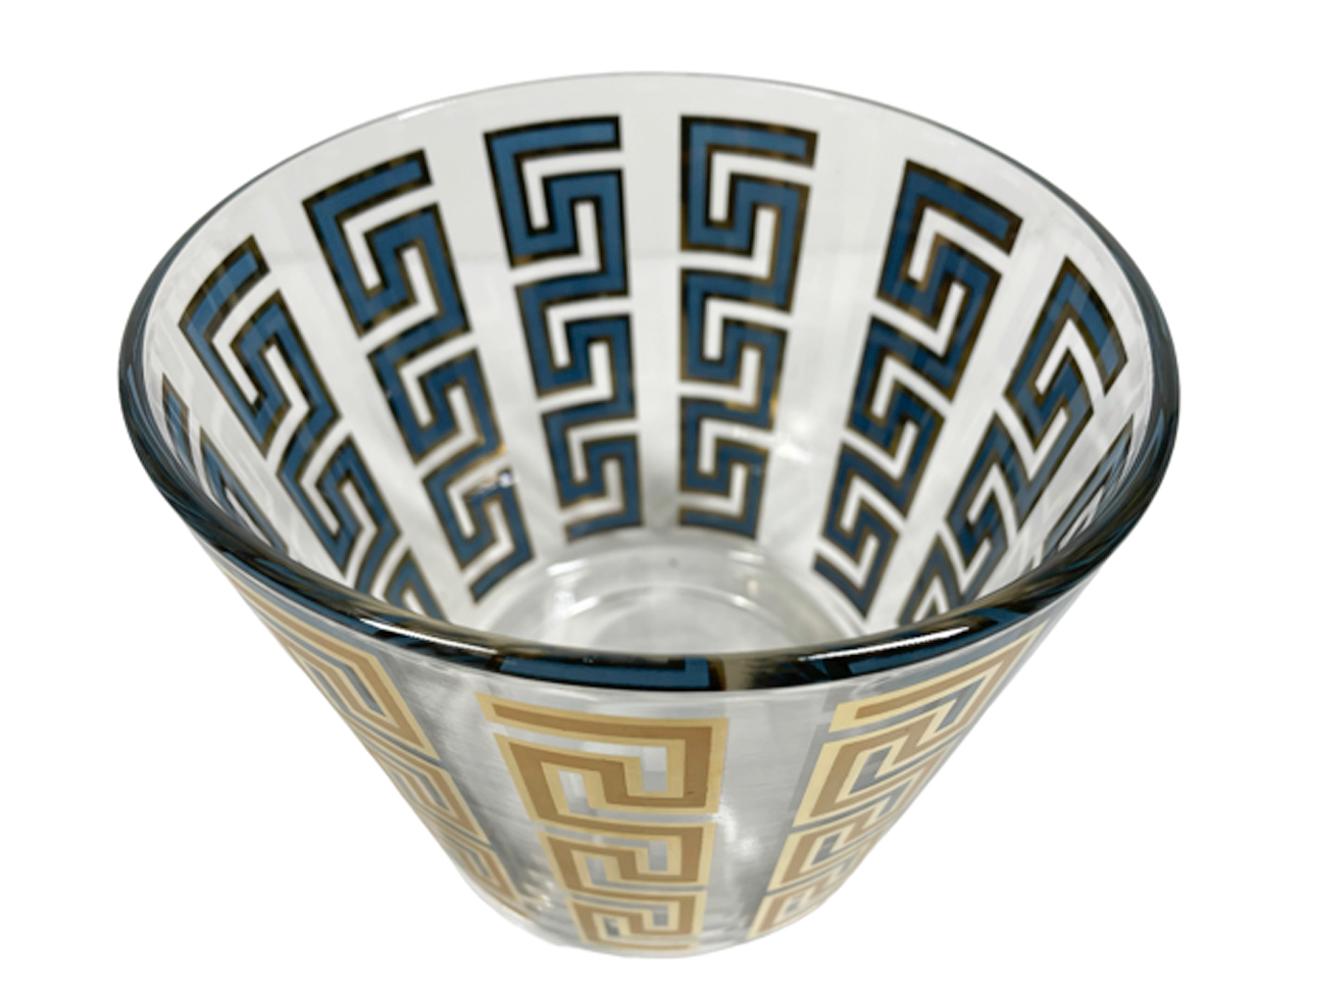 Culver, LTD. double ice bowl / bucket with tapered sides having vertical Greek Key bands of 22k gold over blue enamel. The gold with satin finish within gloss on the exterior with the blue visible only on the interior with gold border.